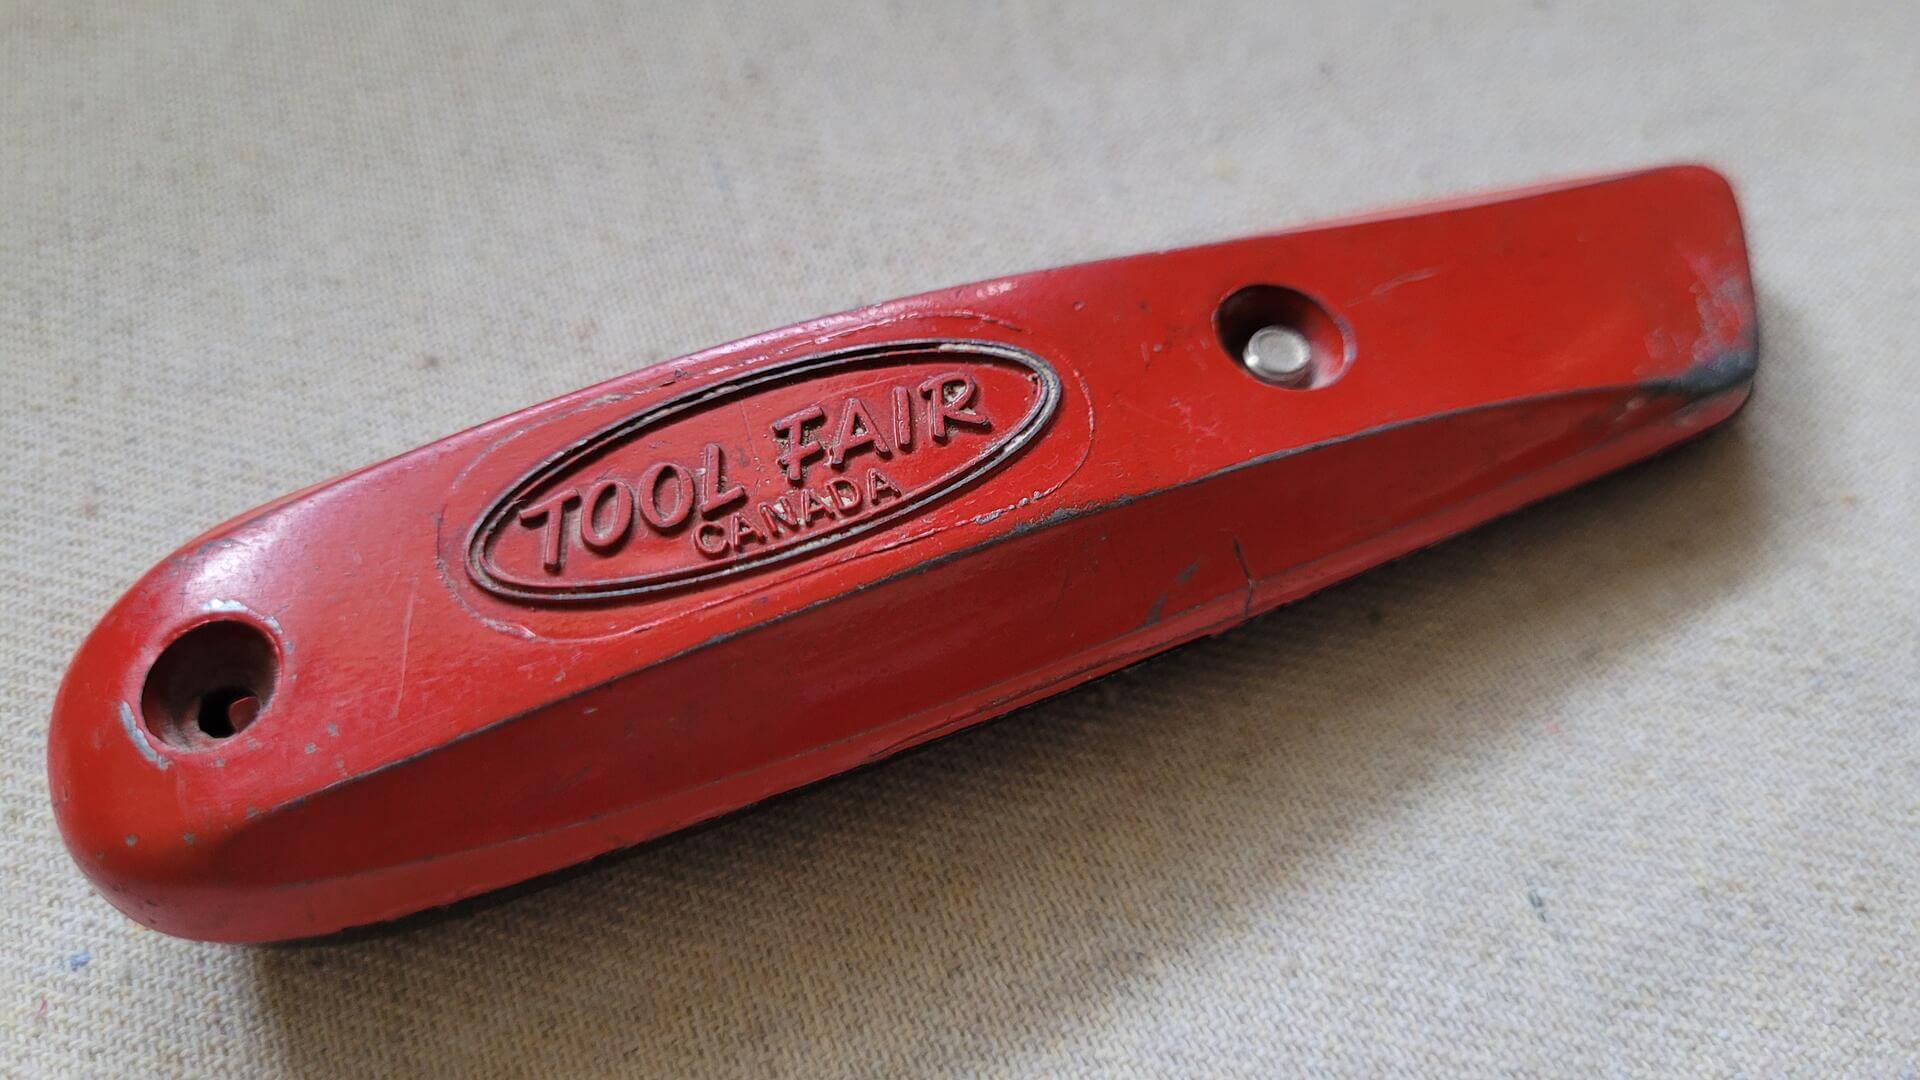 tool-fair-canada-metal-utility-knife-and-box-cutter-antique-and-vintage-canadiana-collectible-hand-tools